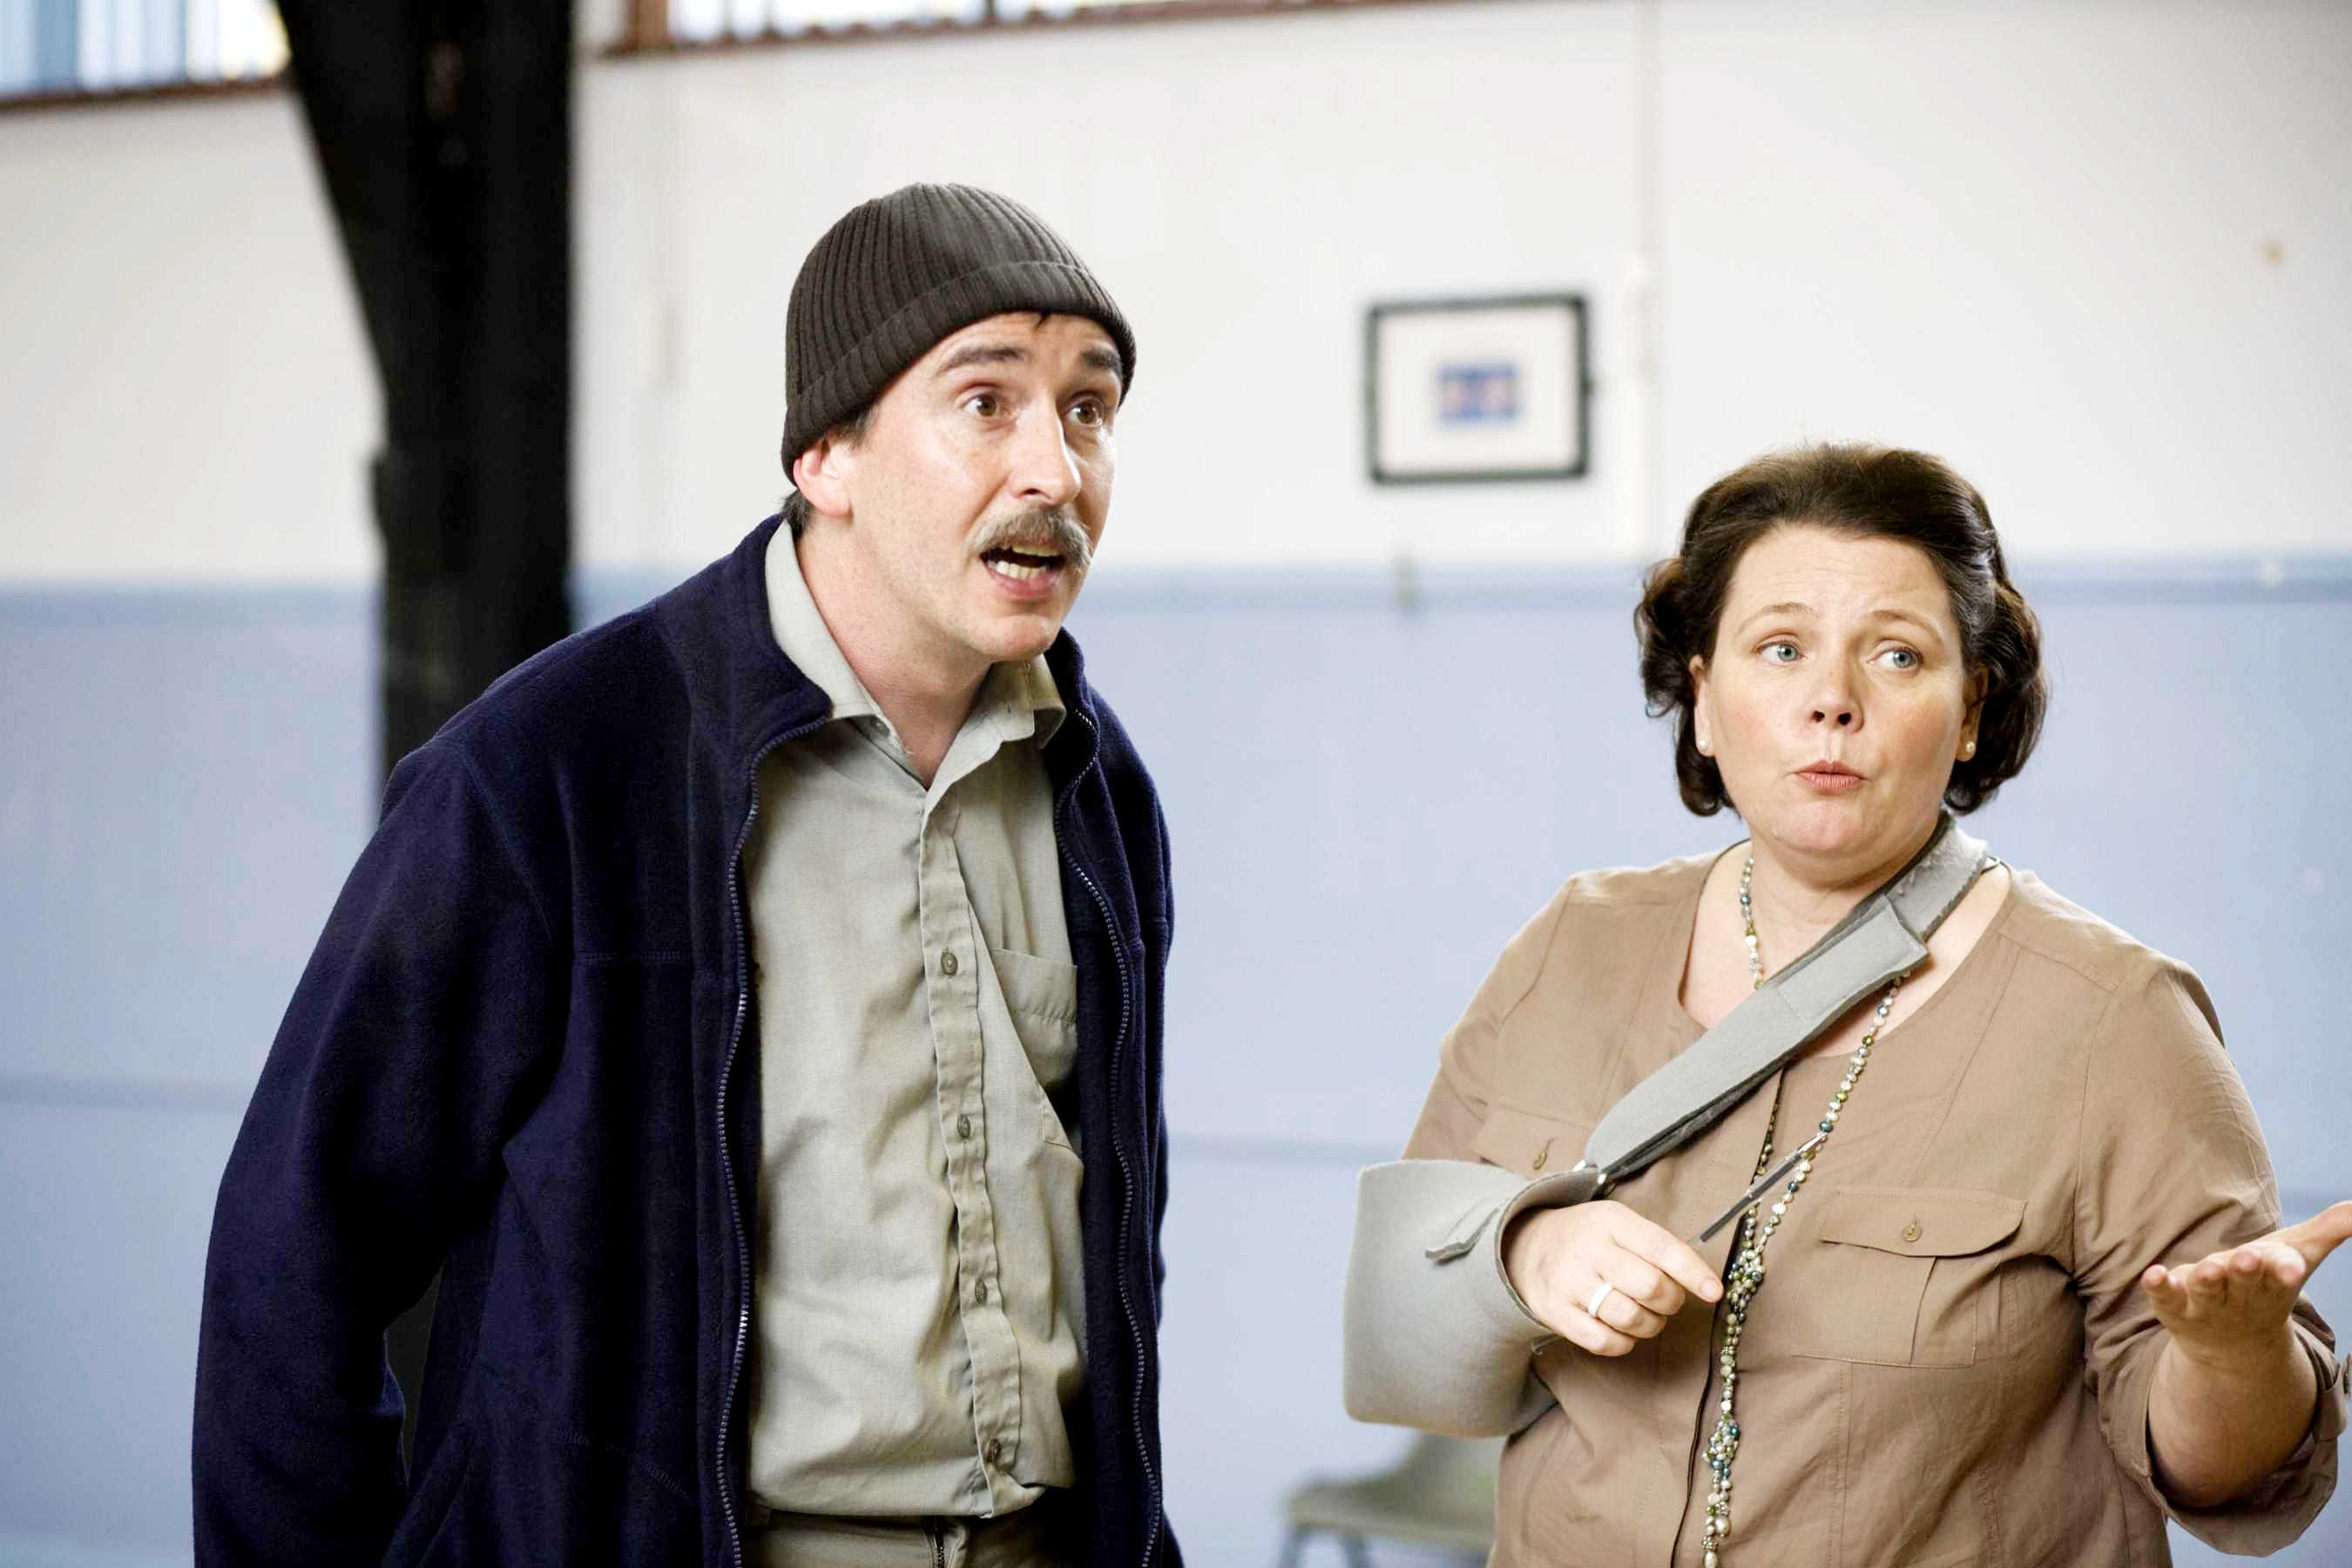 Steve Coogan stars as Paul Michaelson and Joanna Scanlan stars as Roz in IFC Films' In the Loop (2009). Photo credit by Nicola Dove.